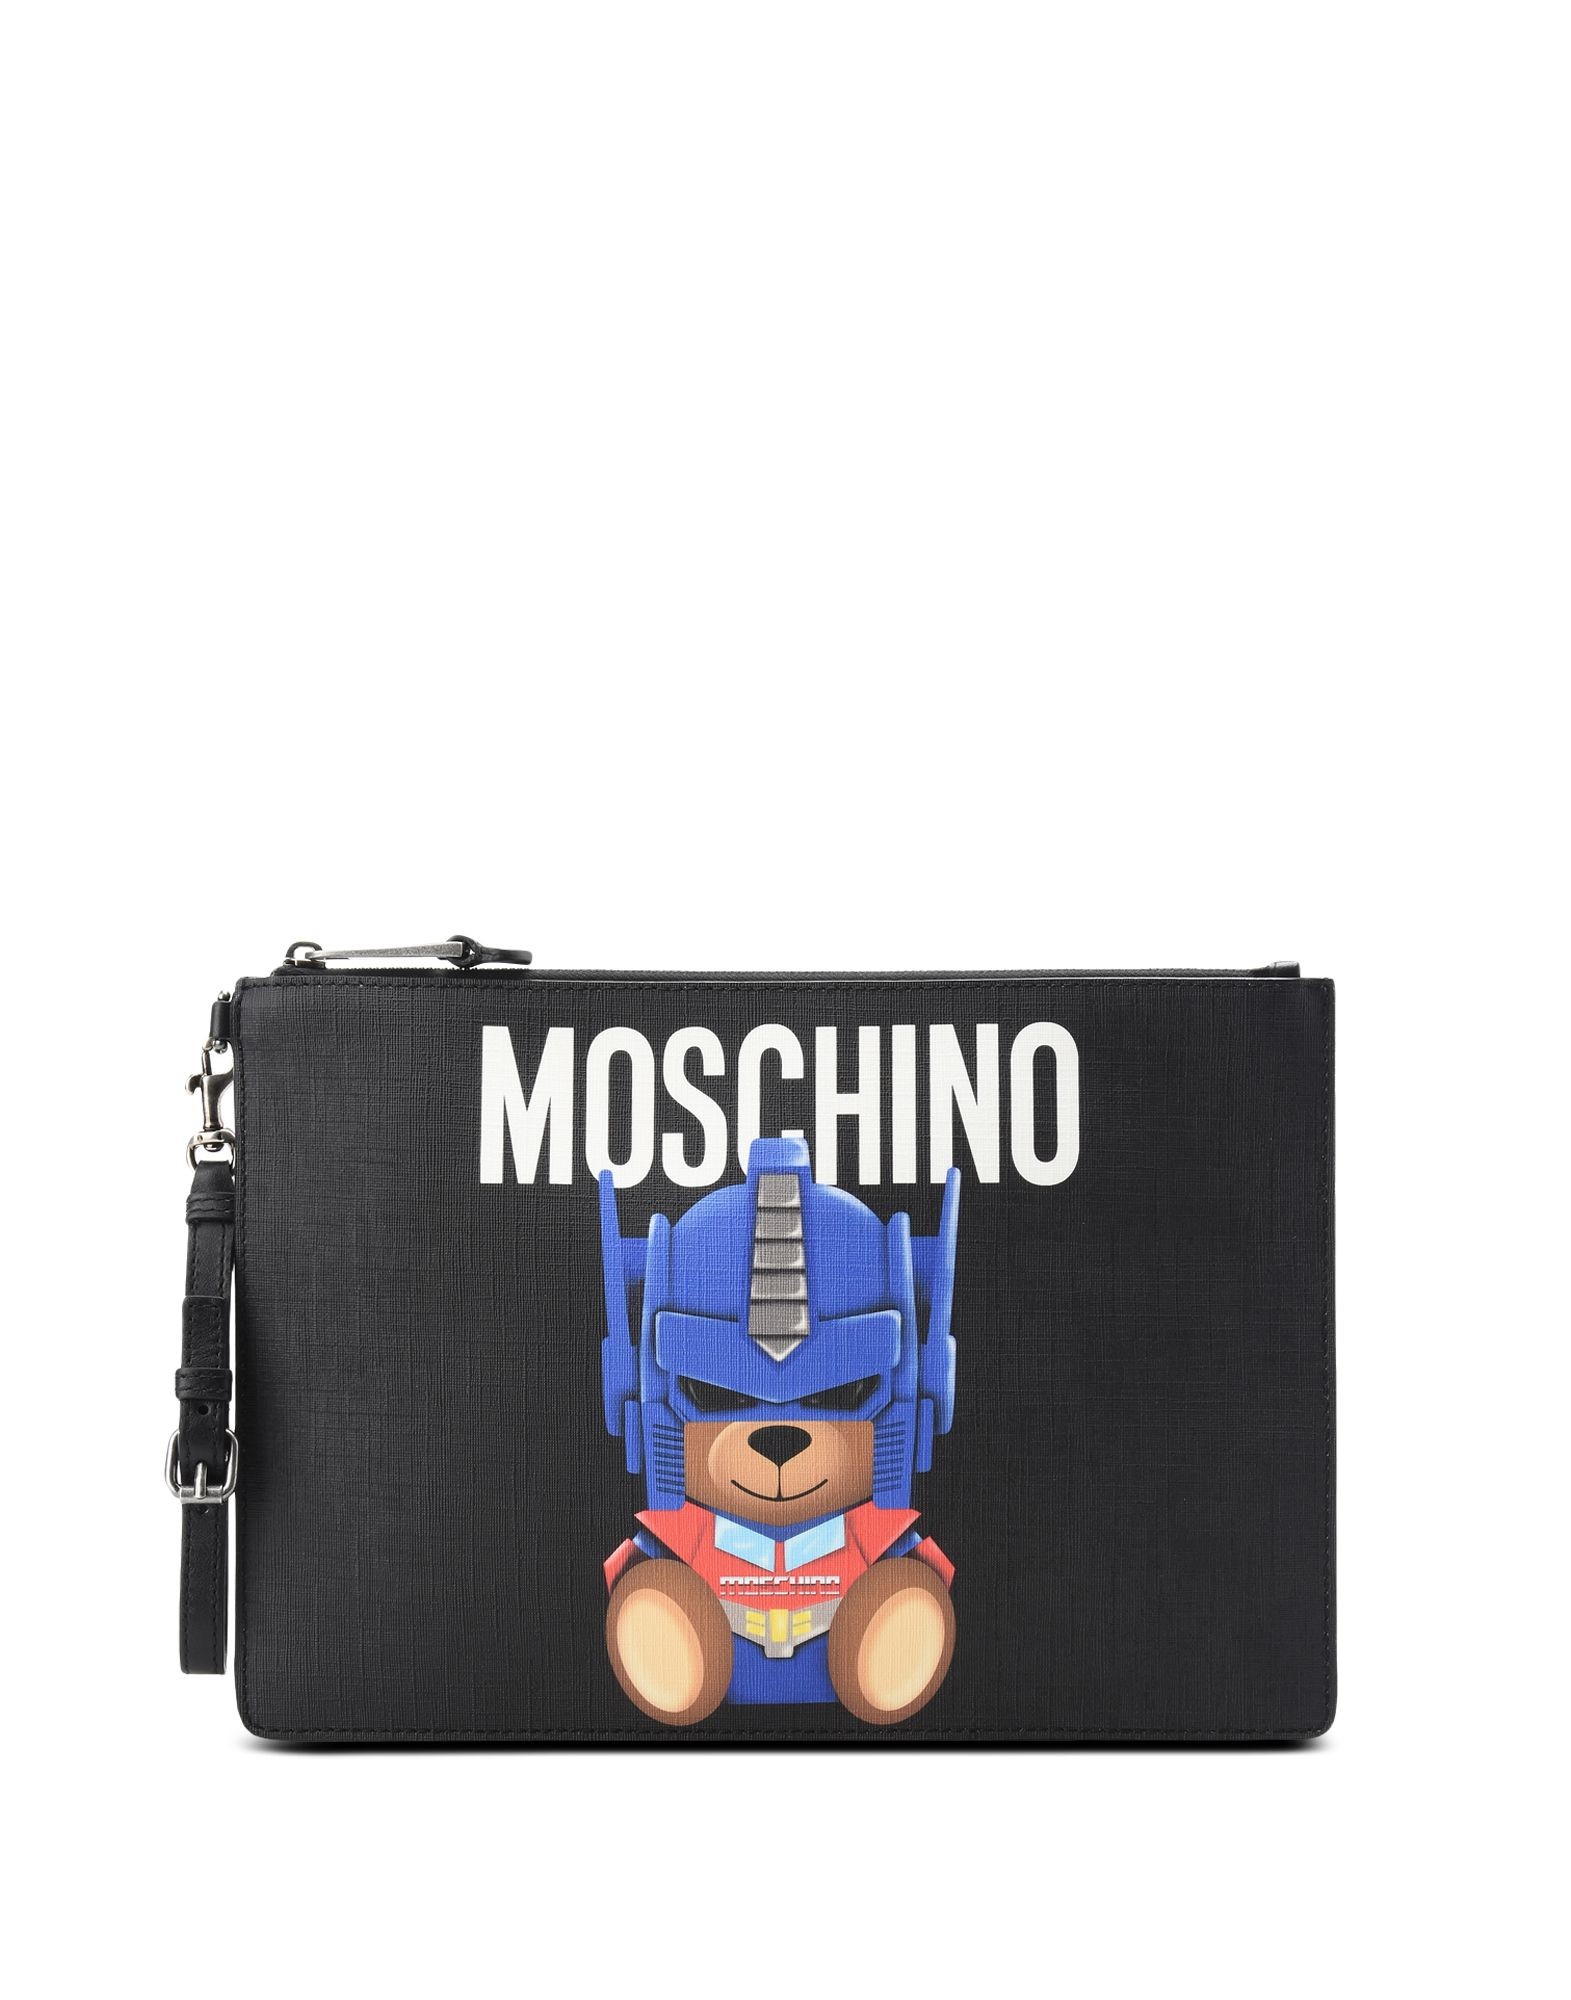 Transformers News: Moschino Transformers Ready to Bear FW17 Collection